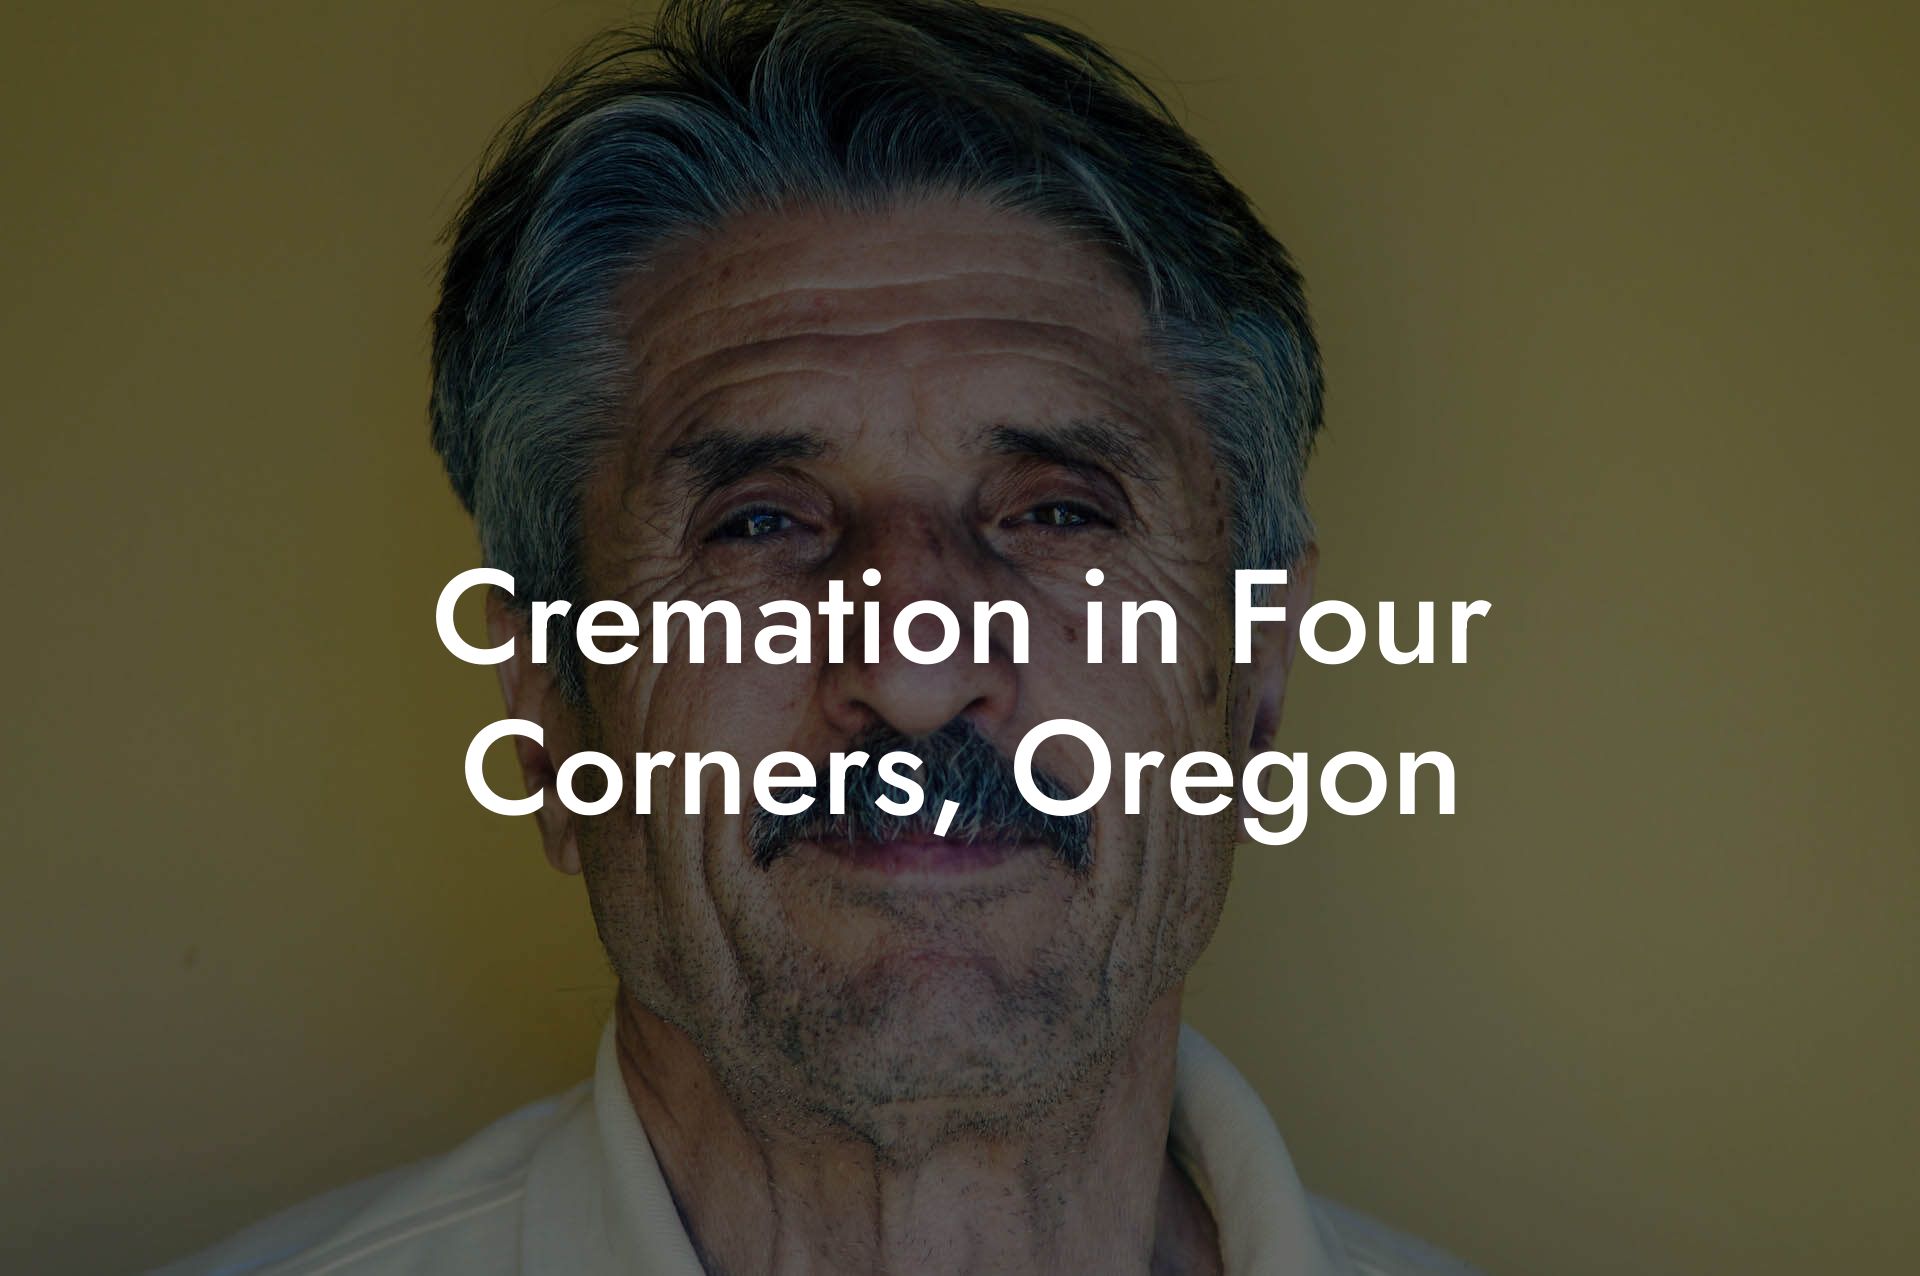 Cremation in Four Corners, Oregon